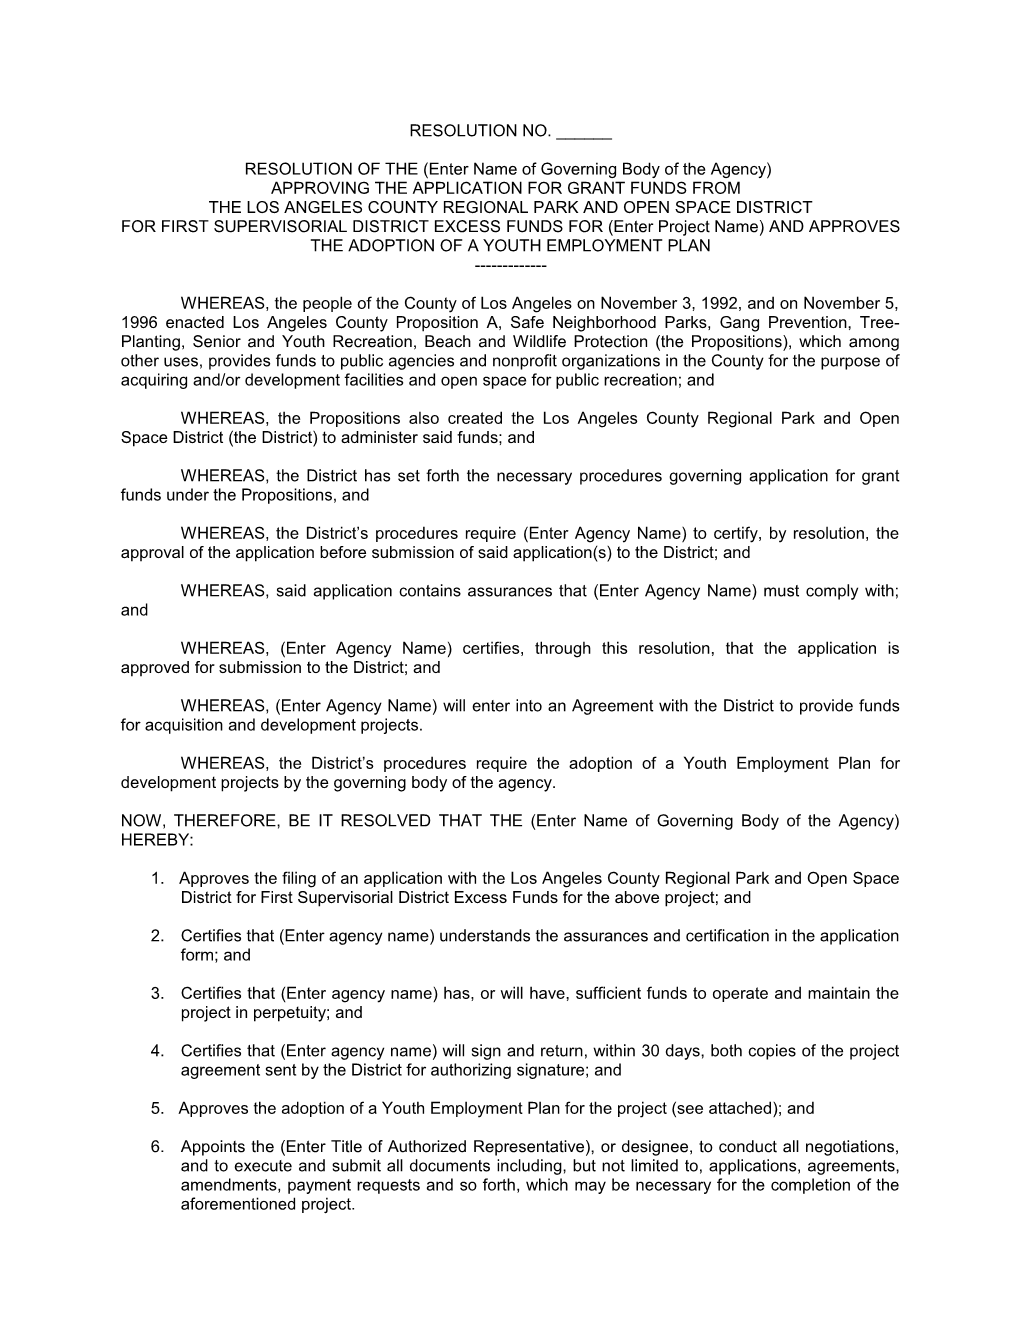 RESOLUTION of the (Enter Name of Governing Body of the Agency)